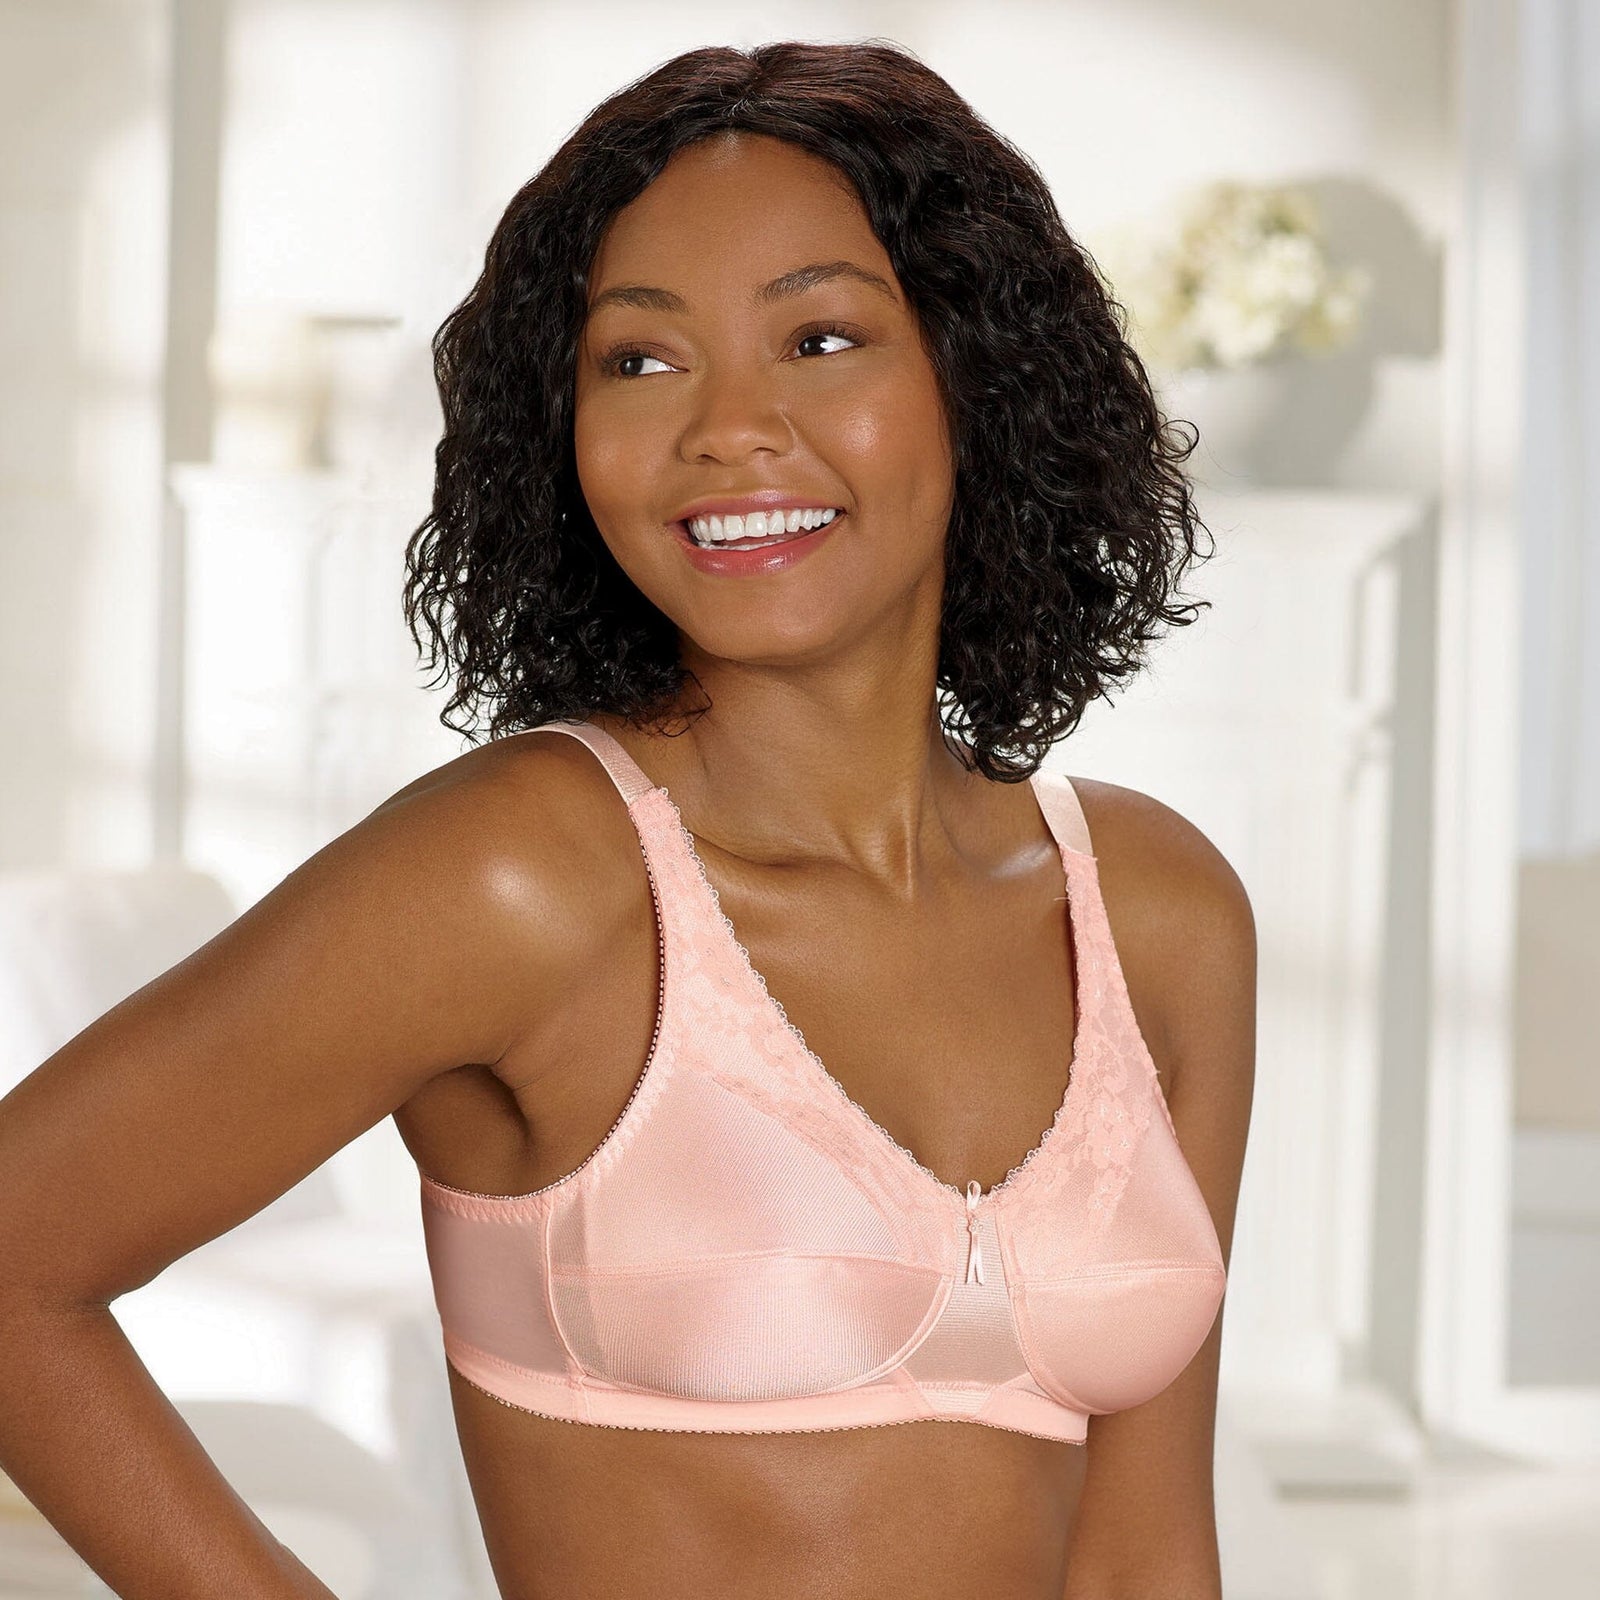 A bespoke lace bra to fit different breast cancer patients - Design Week